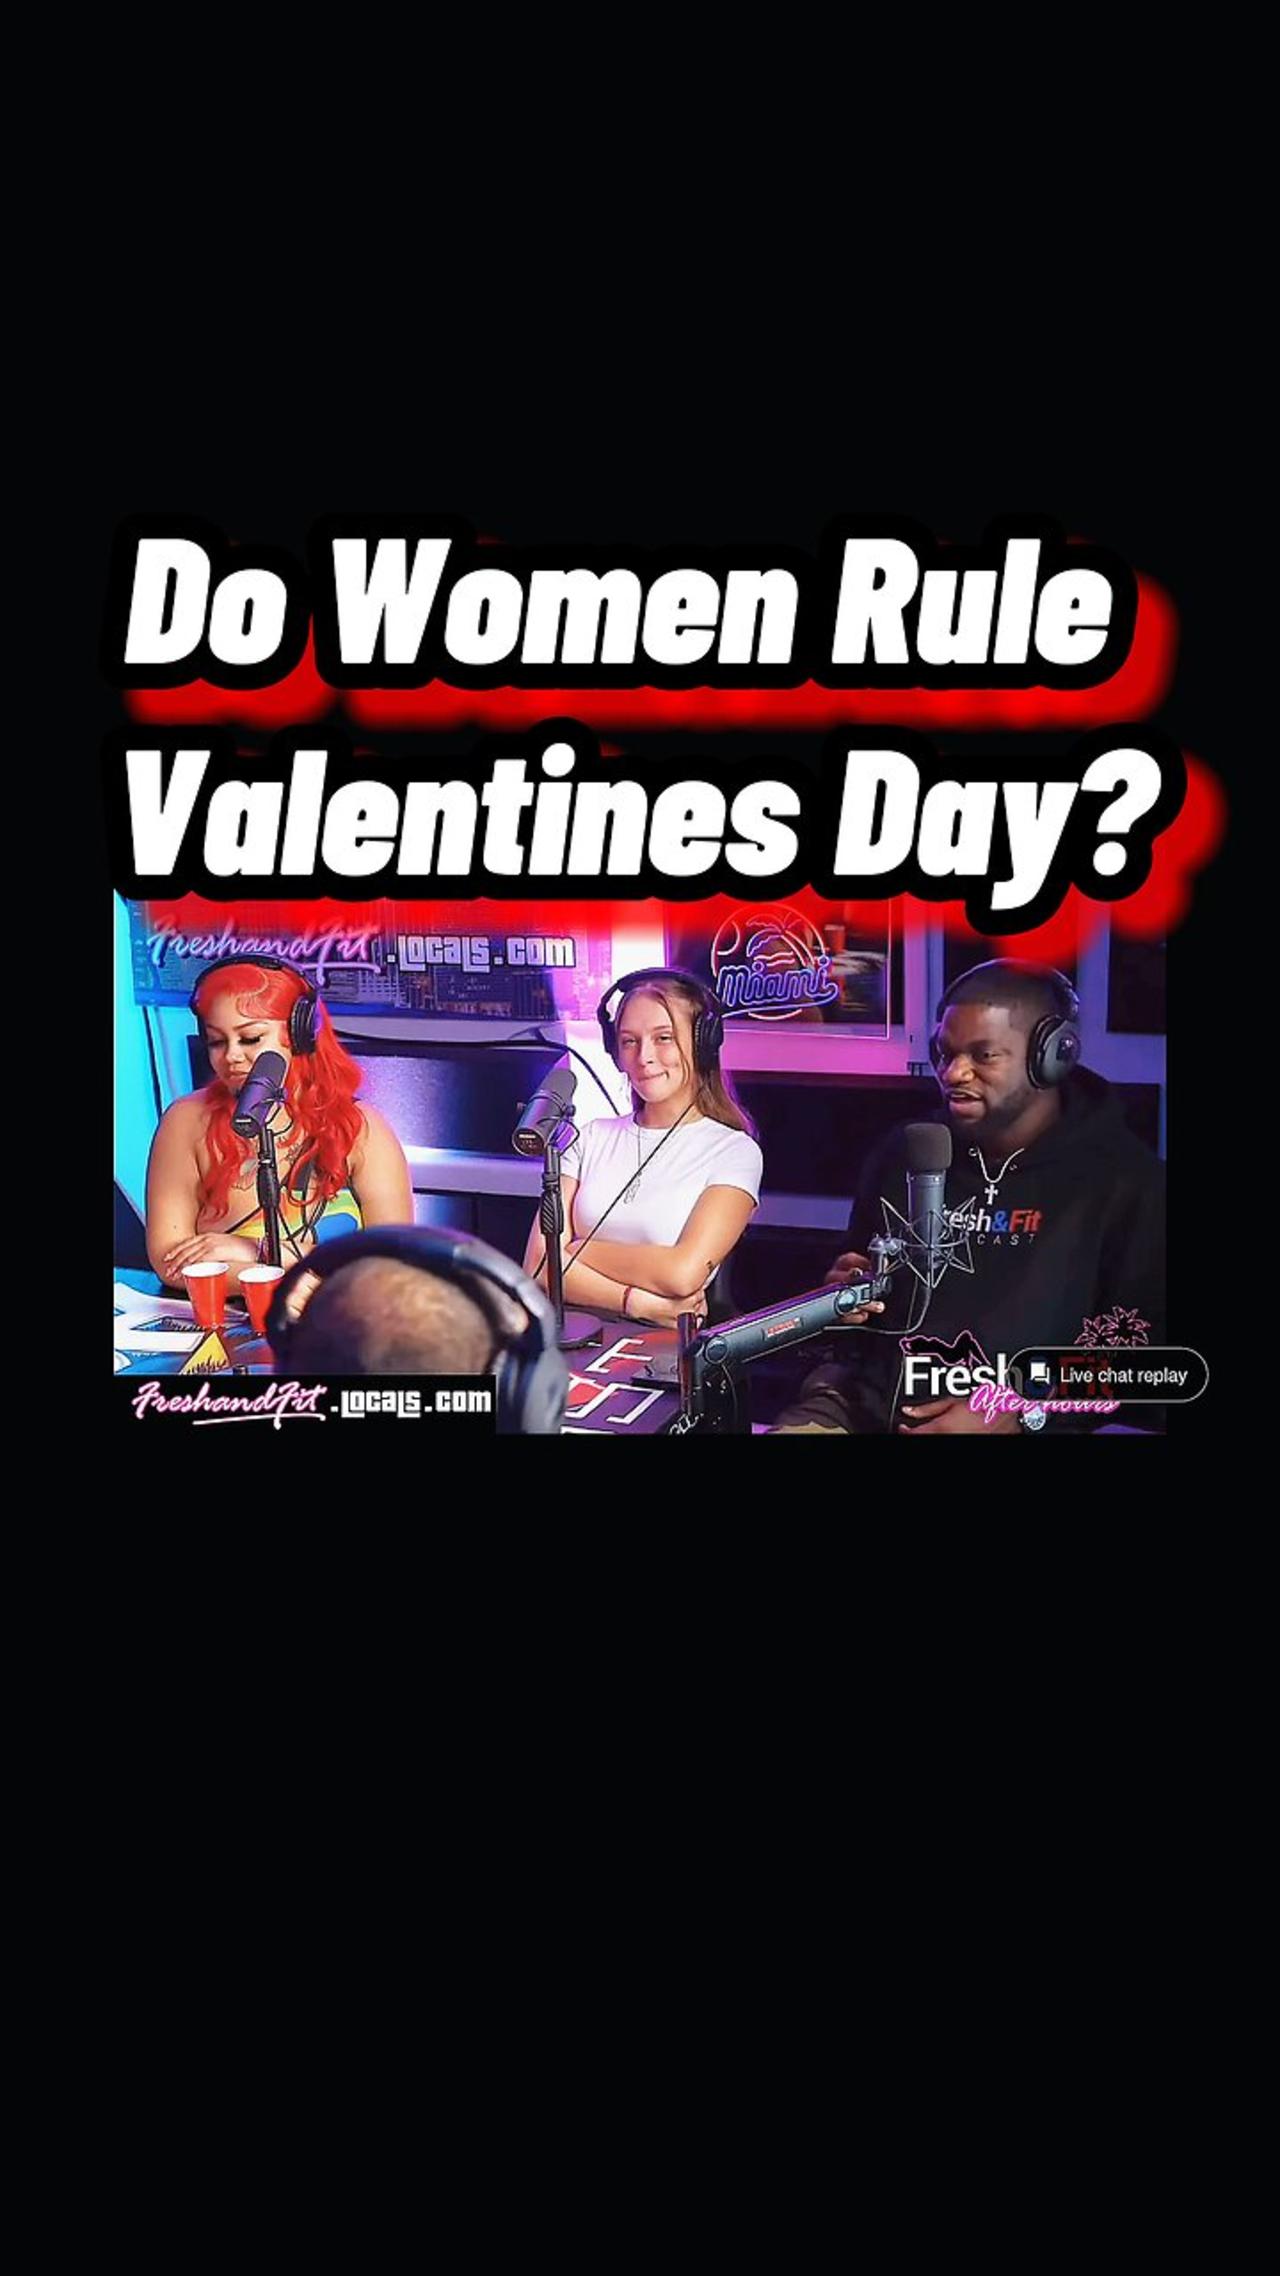 Do Women Rule Valentines Day In Todays Society?? #freshandfit